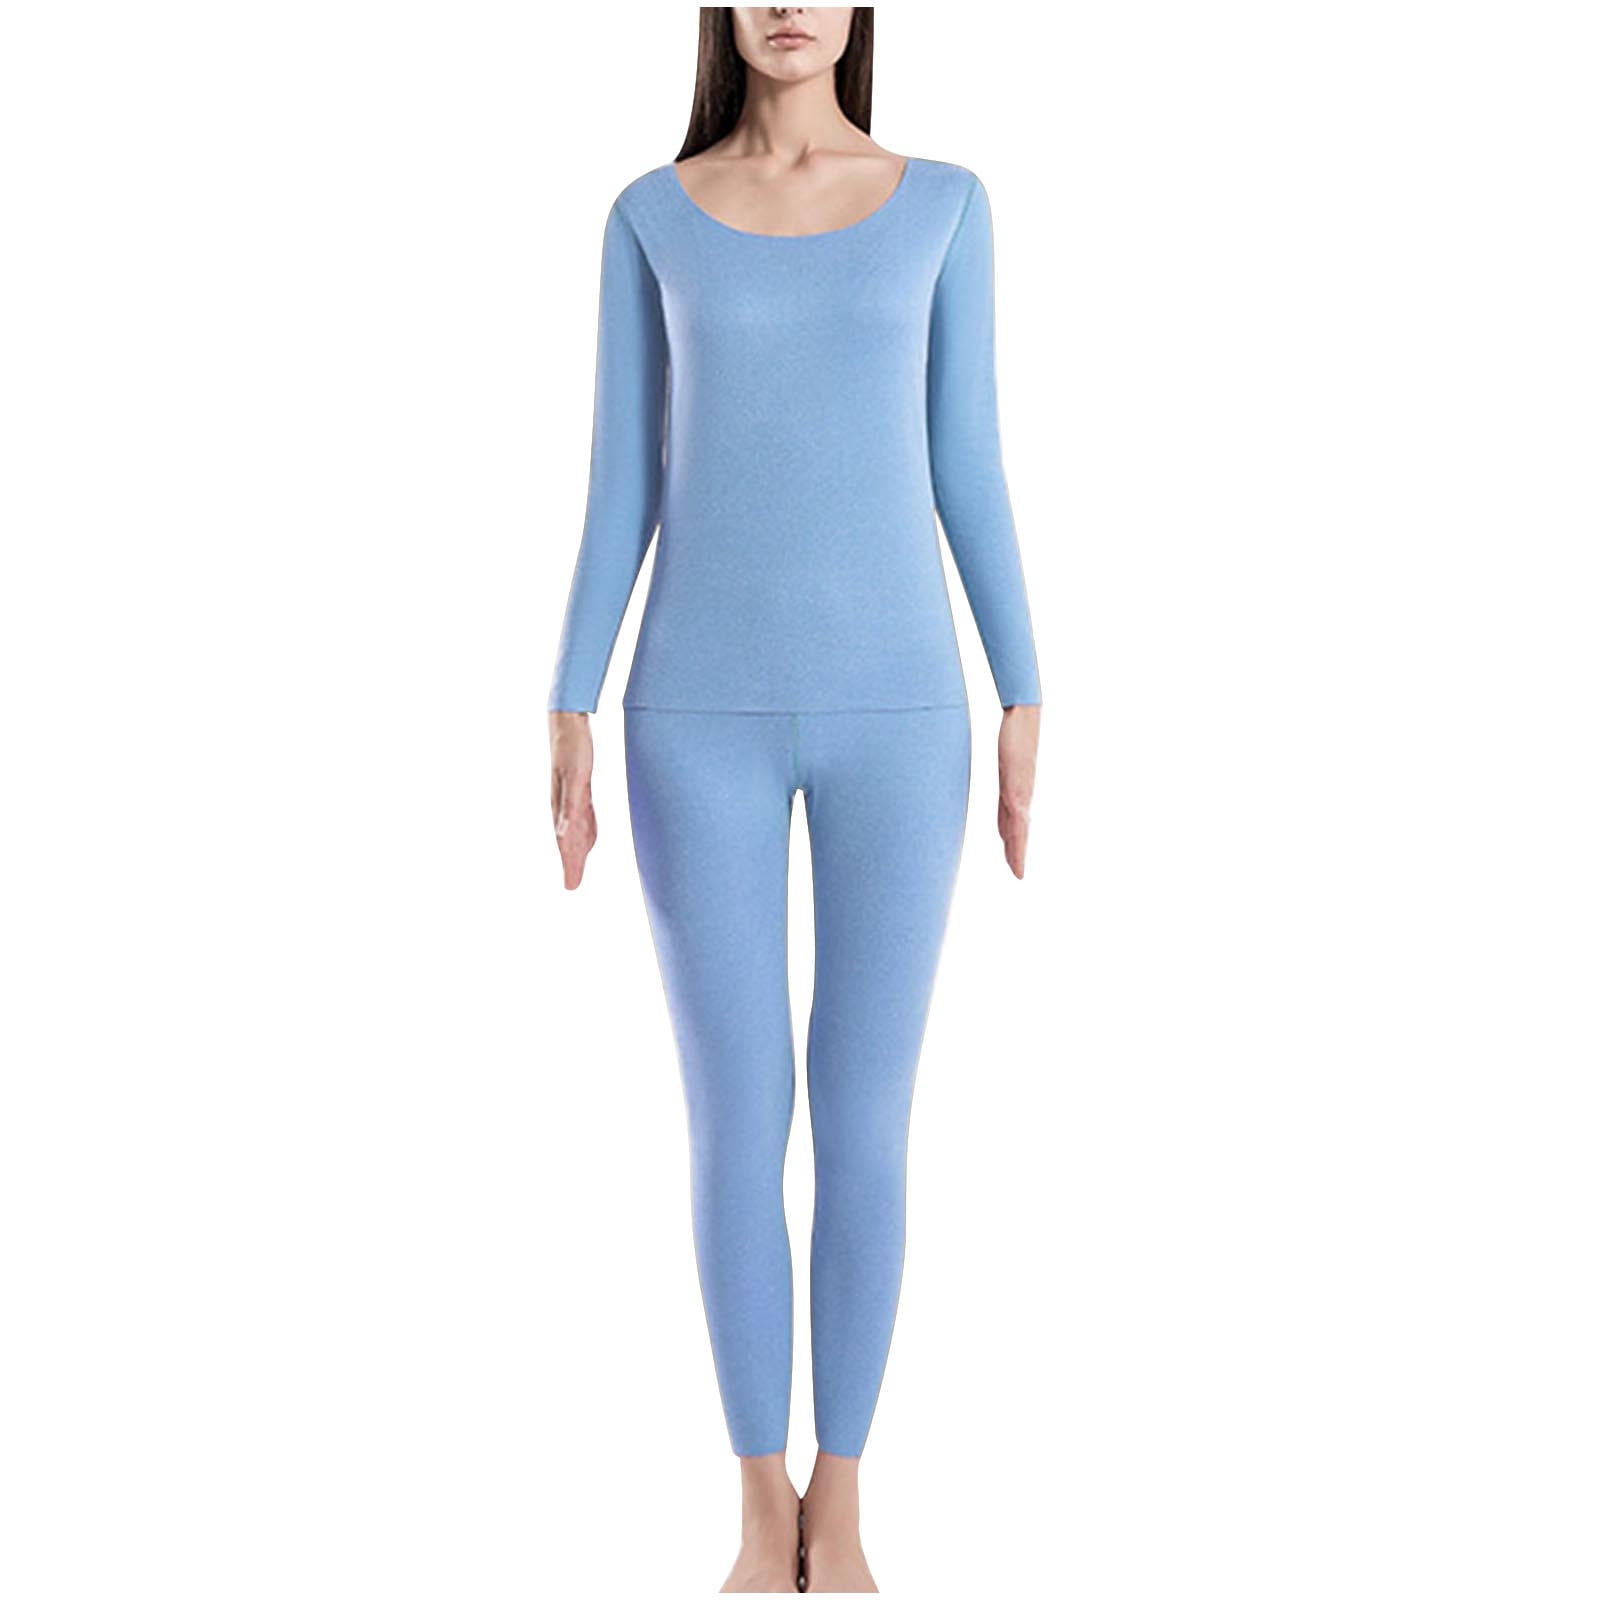 Women's Thermal Underwear Stretchy Long Johns Set for Women Base Layer S~XL  